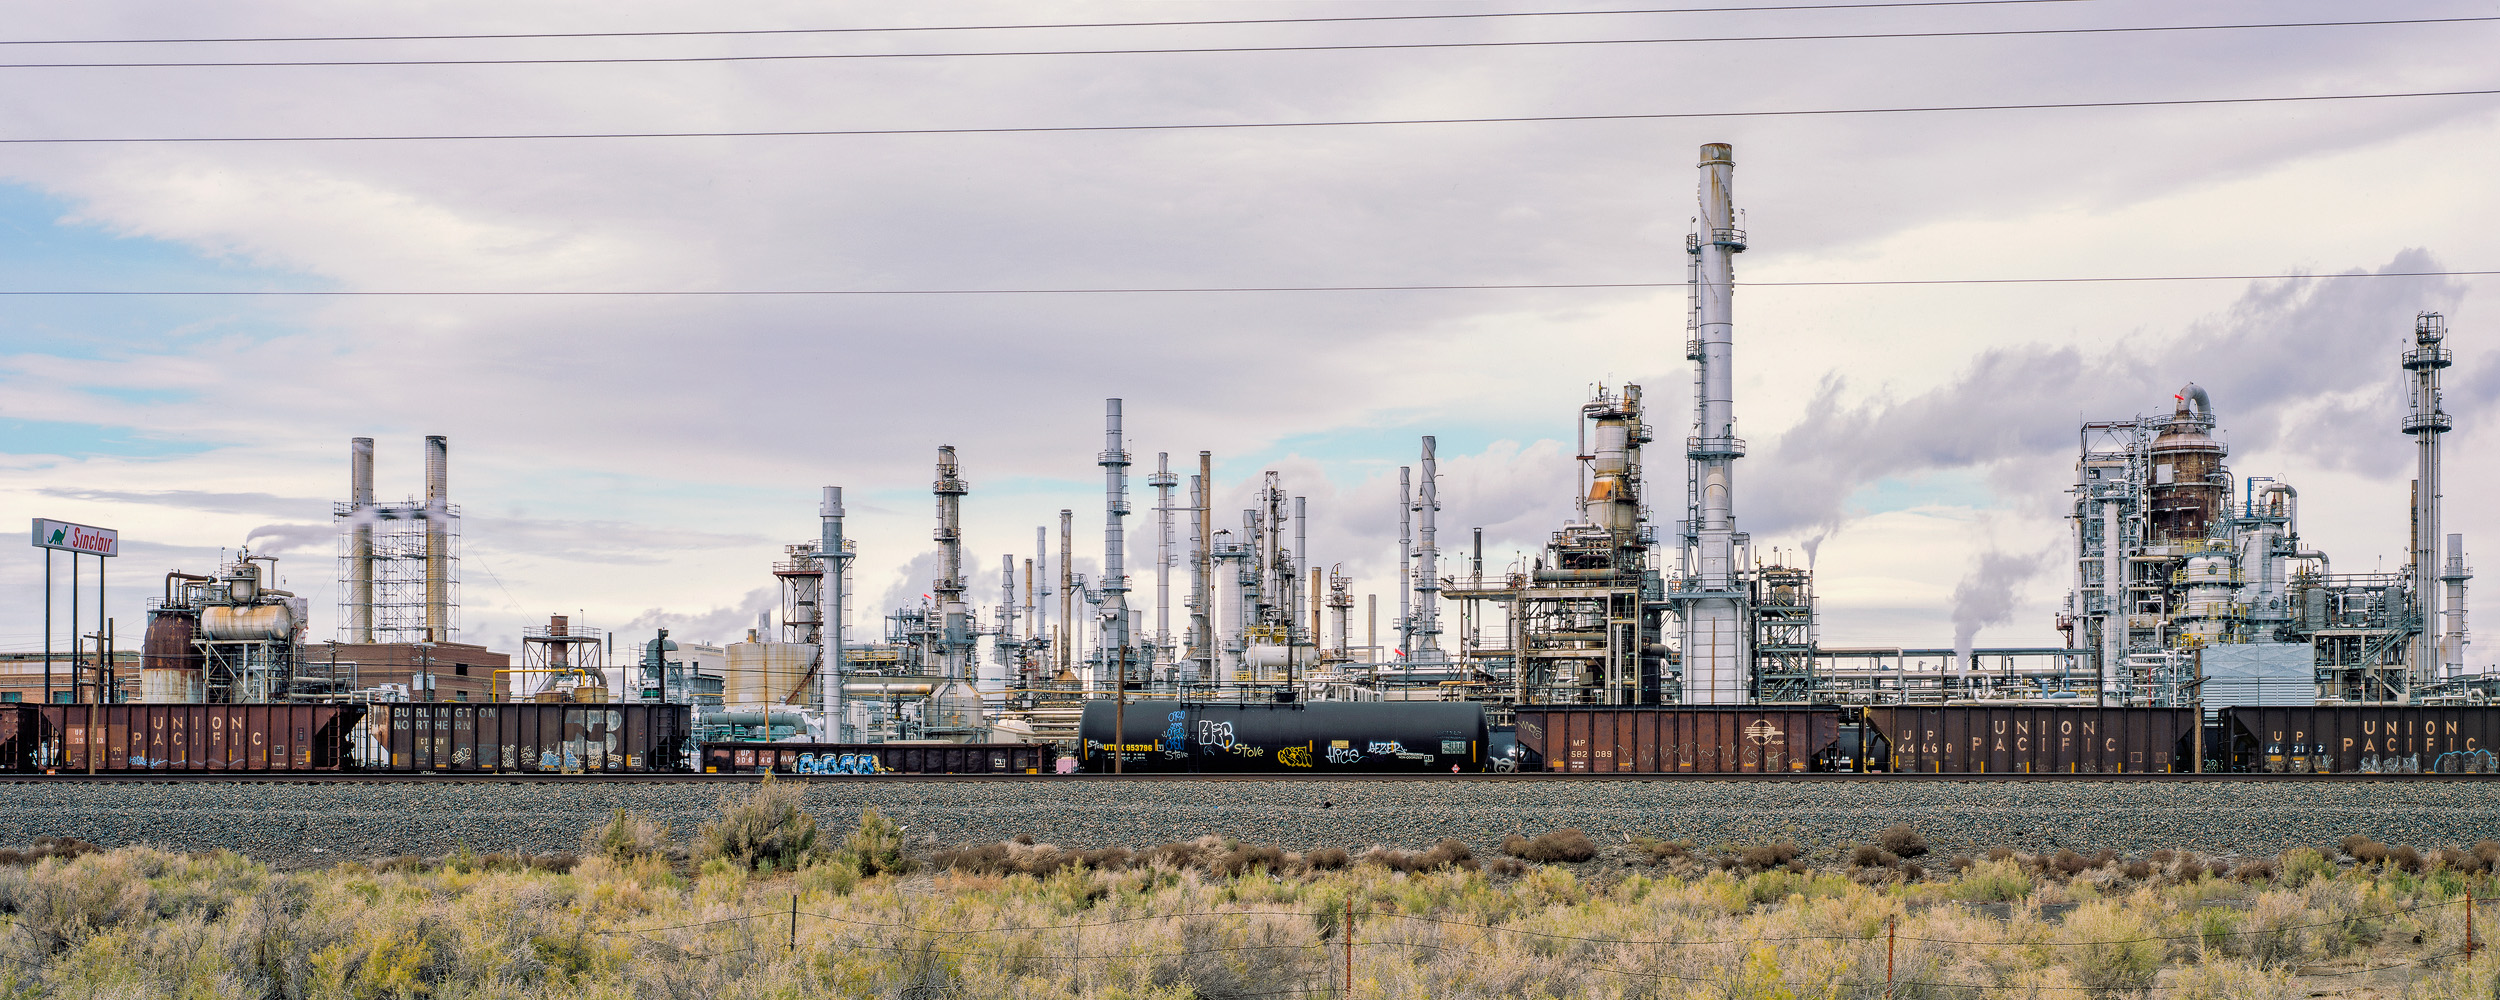 Sinclair Refinery, Carbon County, Wyoming